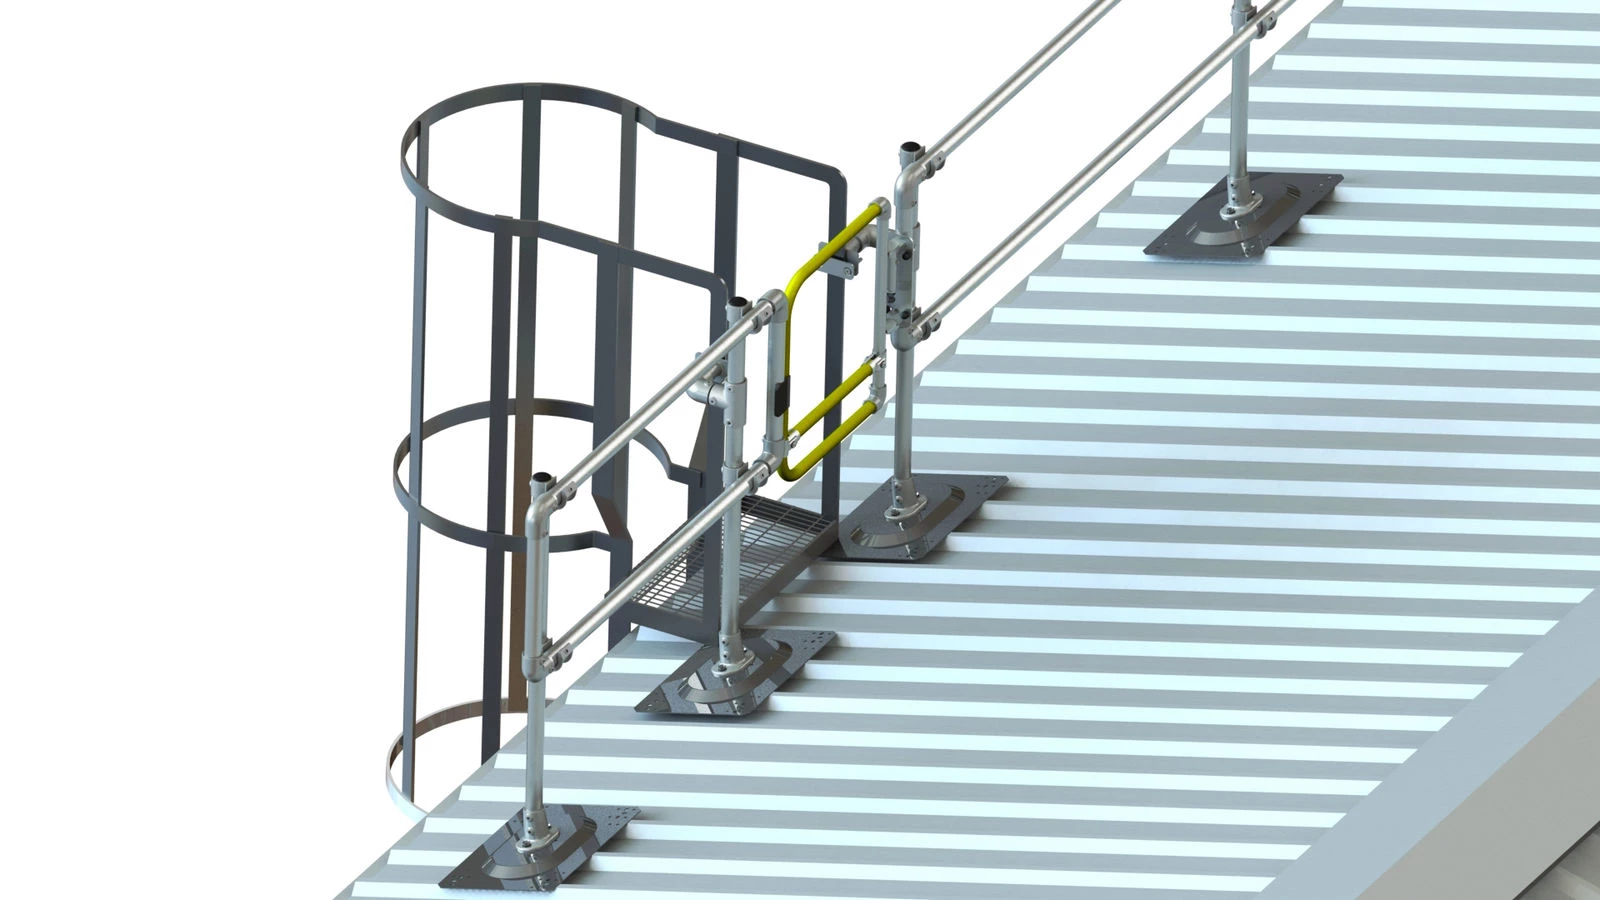 Kee Guard ladder | Kee Gate | self closing safety gate | rooftop ladder | rooftop safe access | roof edge railings system